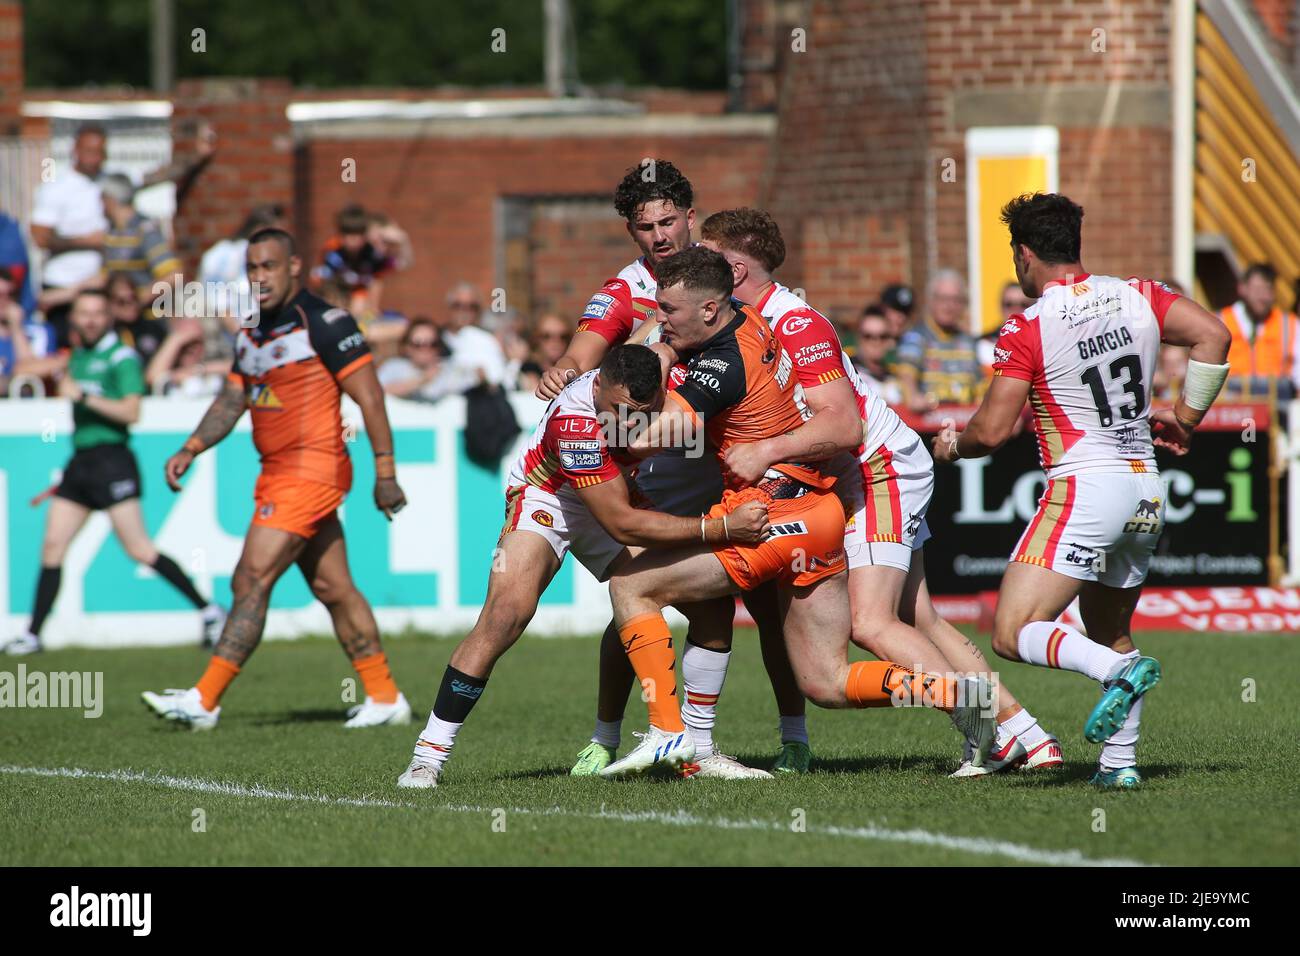 Castleford, UK. 26th June, 2022. The Mend-A-Hose Jungle, Castleford, West Yorkshire, 26th June 2022. Betfred Super League Castleford Tigers vs Catalan Dragons Jake Trueman of Castleford Tigers is tackled by 3 Catalan Dragons defenders. Credit: Touchlinepics/Alamy Live News Stock Photo